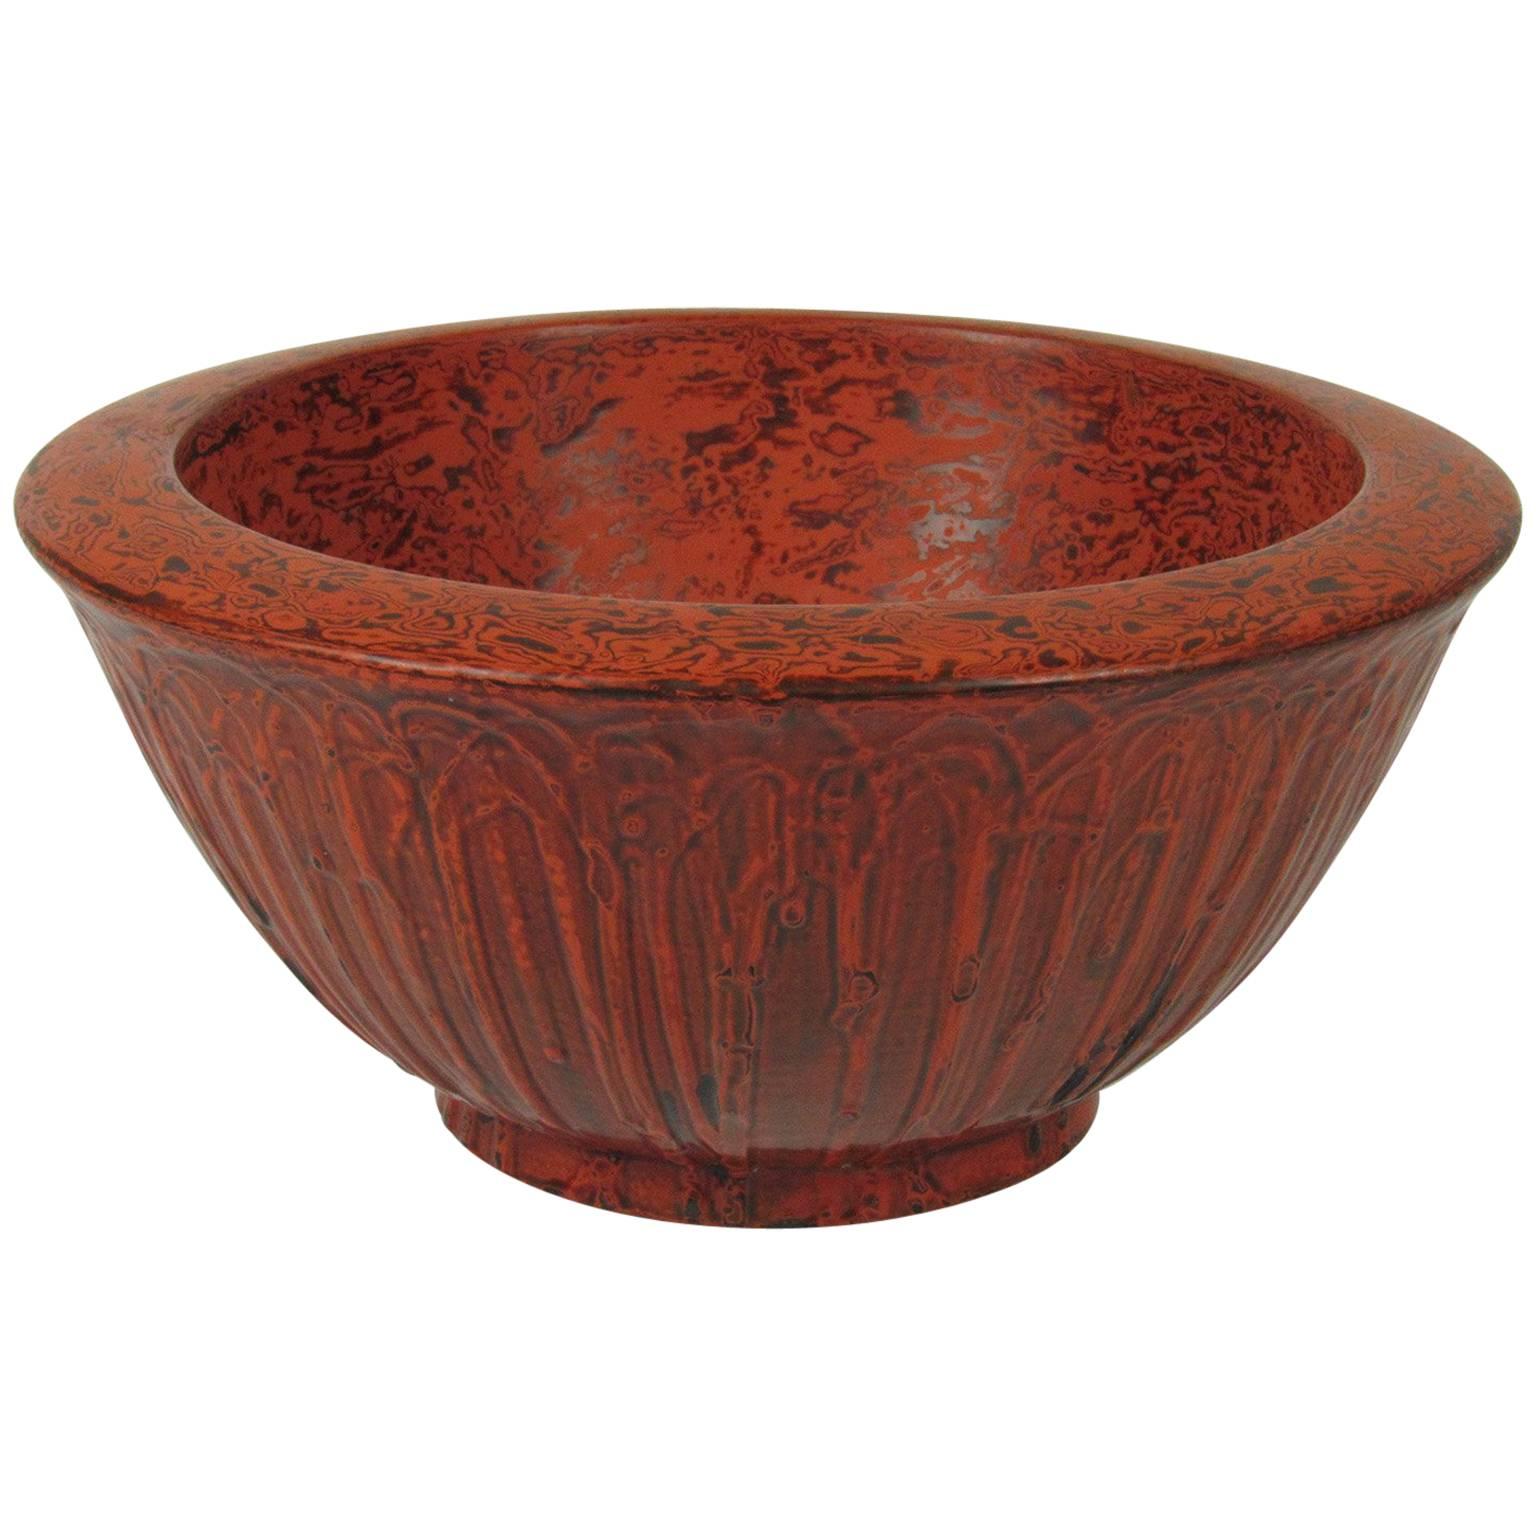 Midcentury Japanese Red Marbleized Lacquer Wide Rimmed Bowl For Sale